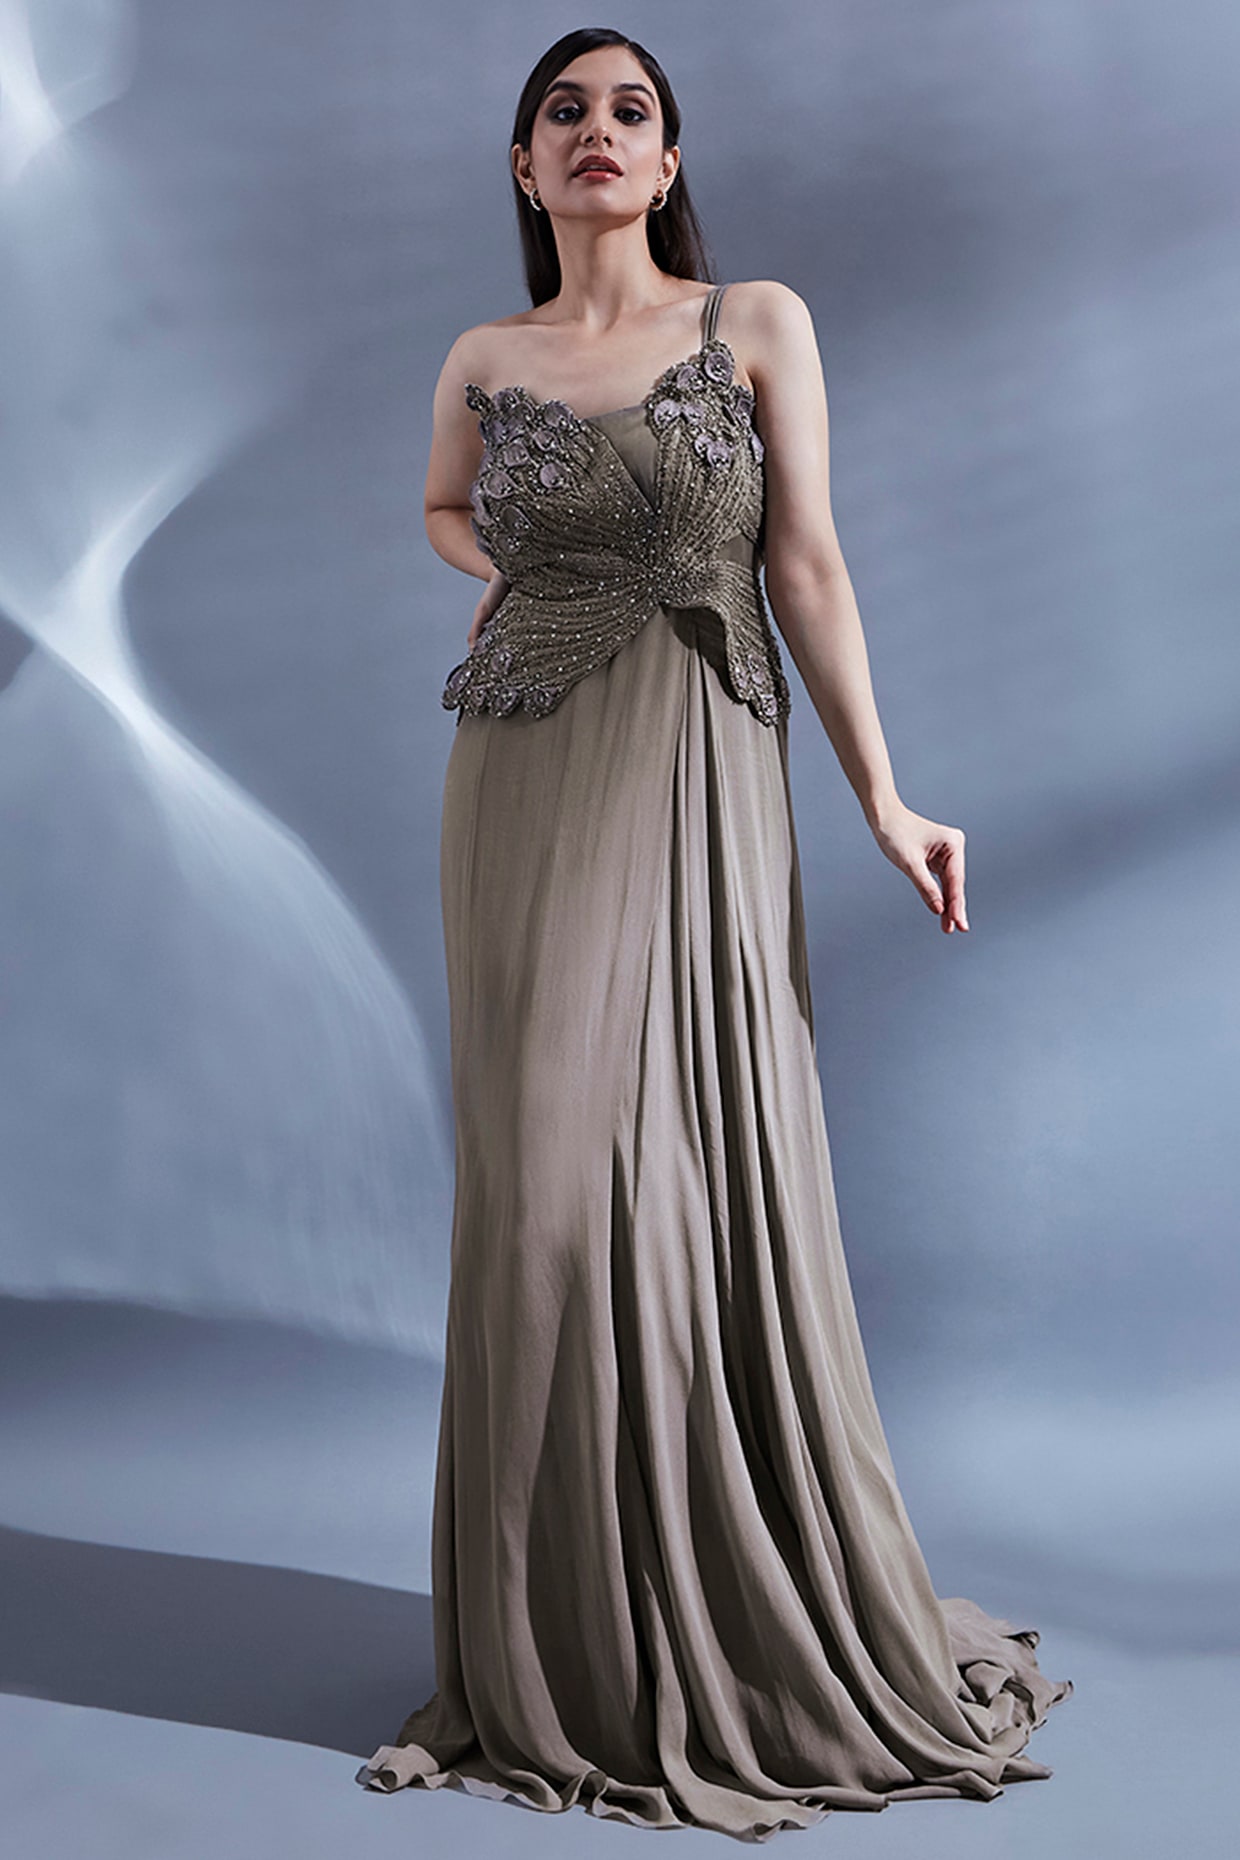 Silver beaded evening gown with rhinestone crystals | #dre… | Flickr